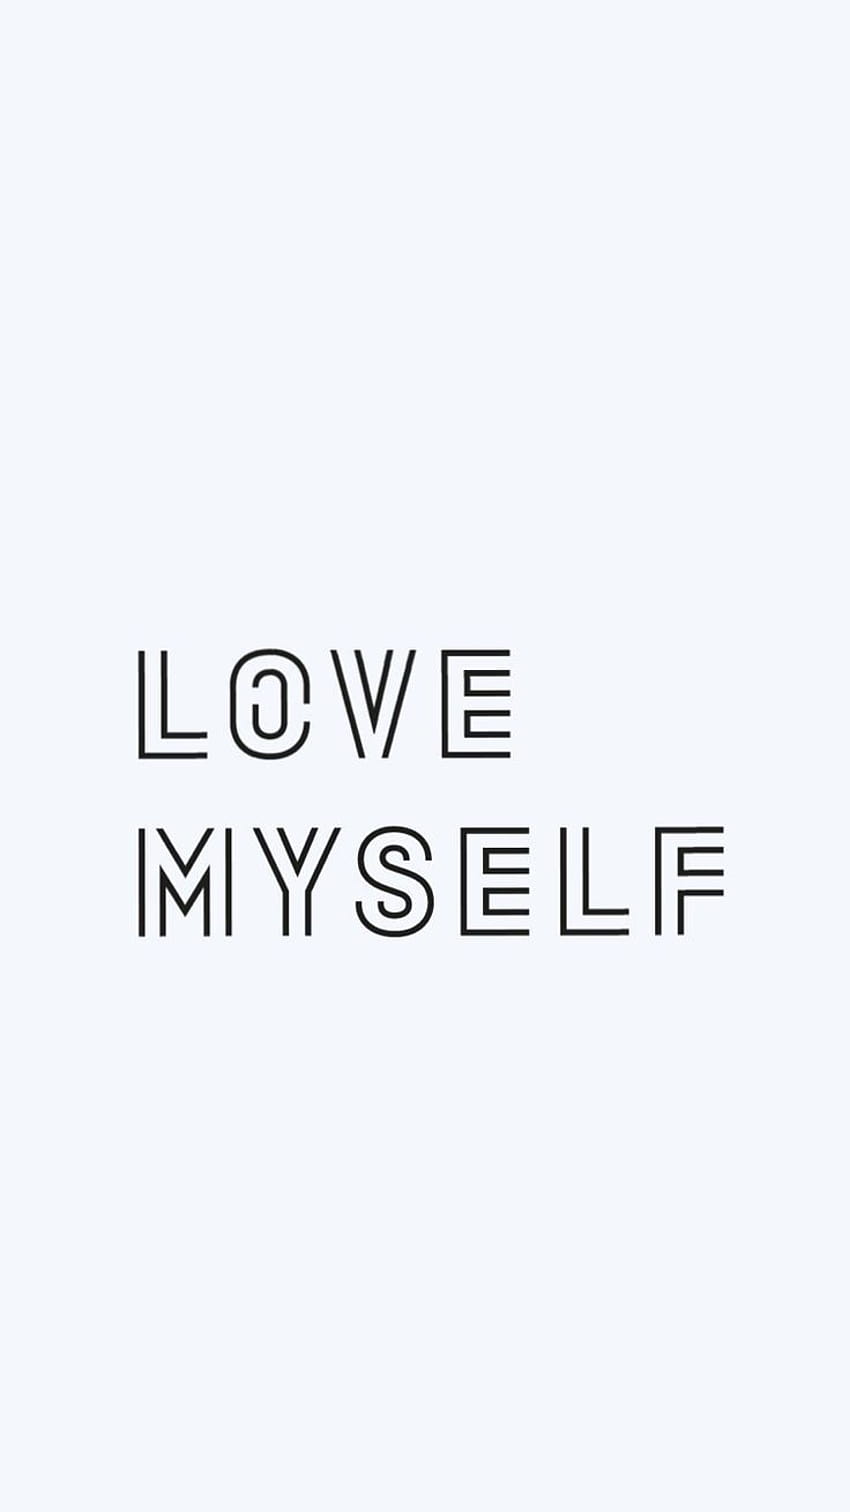 I love myself  download free mobile wallpaper  ZOXEE